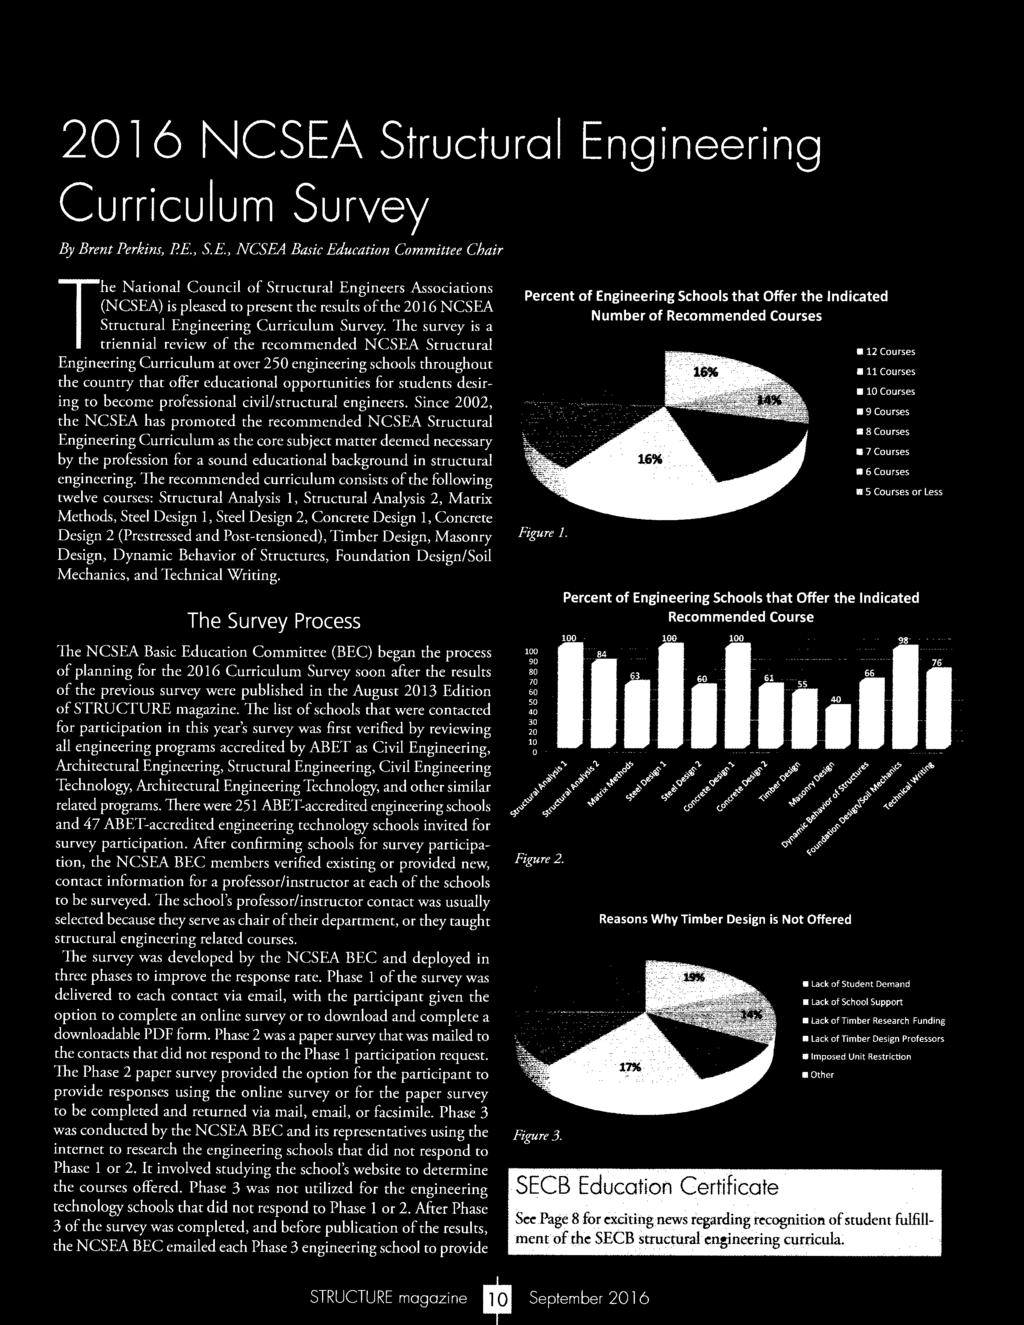 The survey is a triennial review of the recommended NCSEA Structural Engineering Curriculum at over 250 engineering schools throughout the country that offer educational opportunities for students